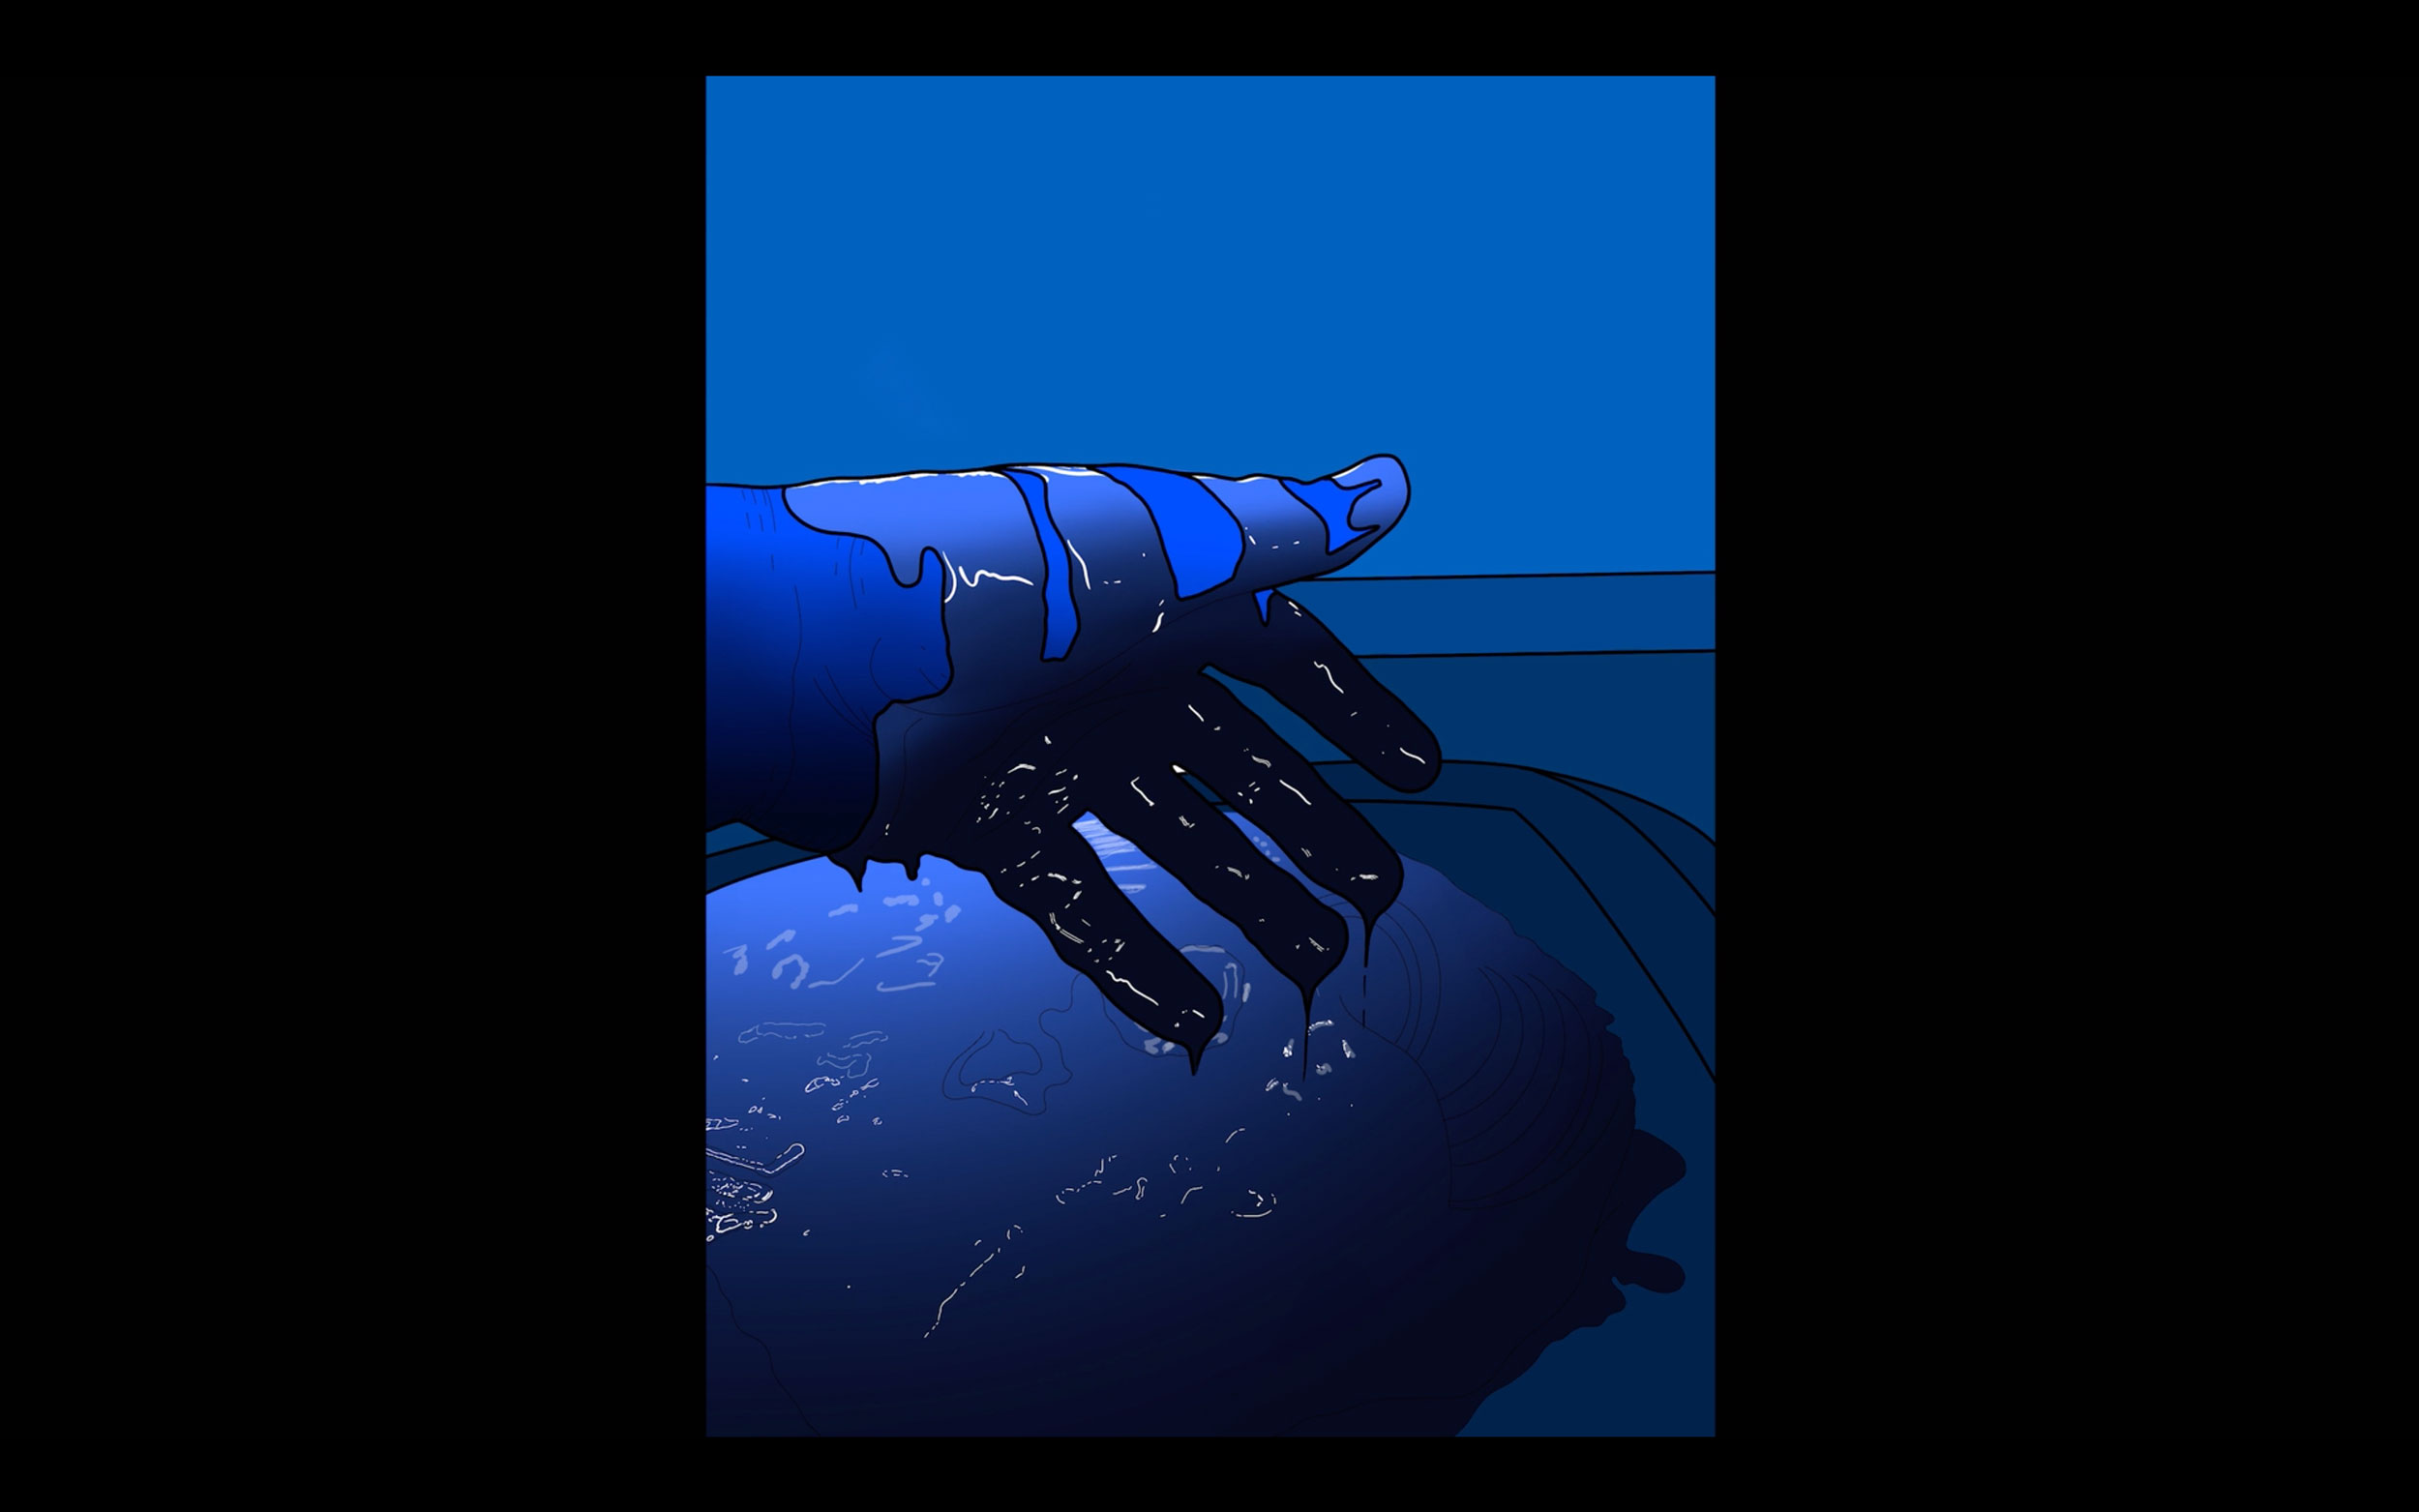 A digital illustration of a blue hand on a blue background. The hand has a liquid substance dripping from the fingers into a puddle. The image is a portrait format and framed with a black background.